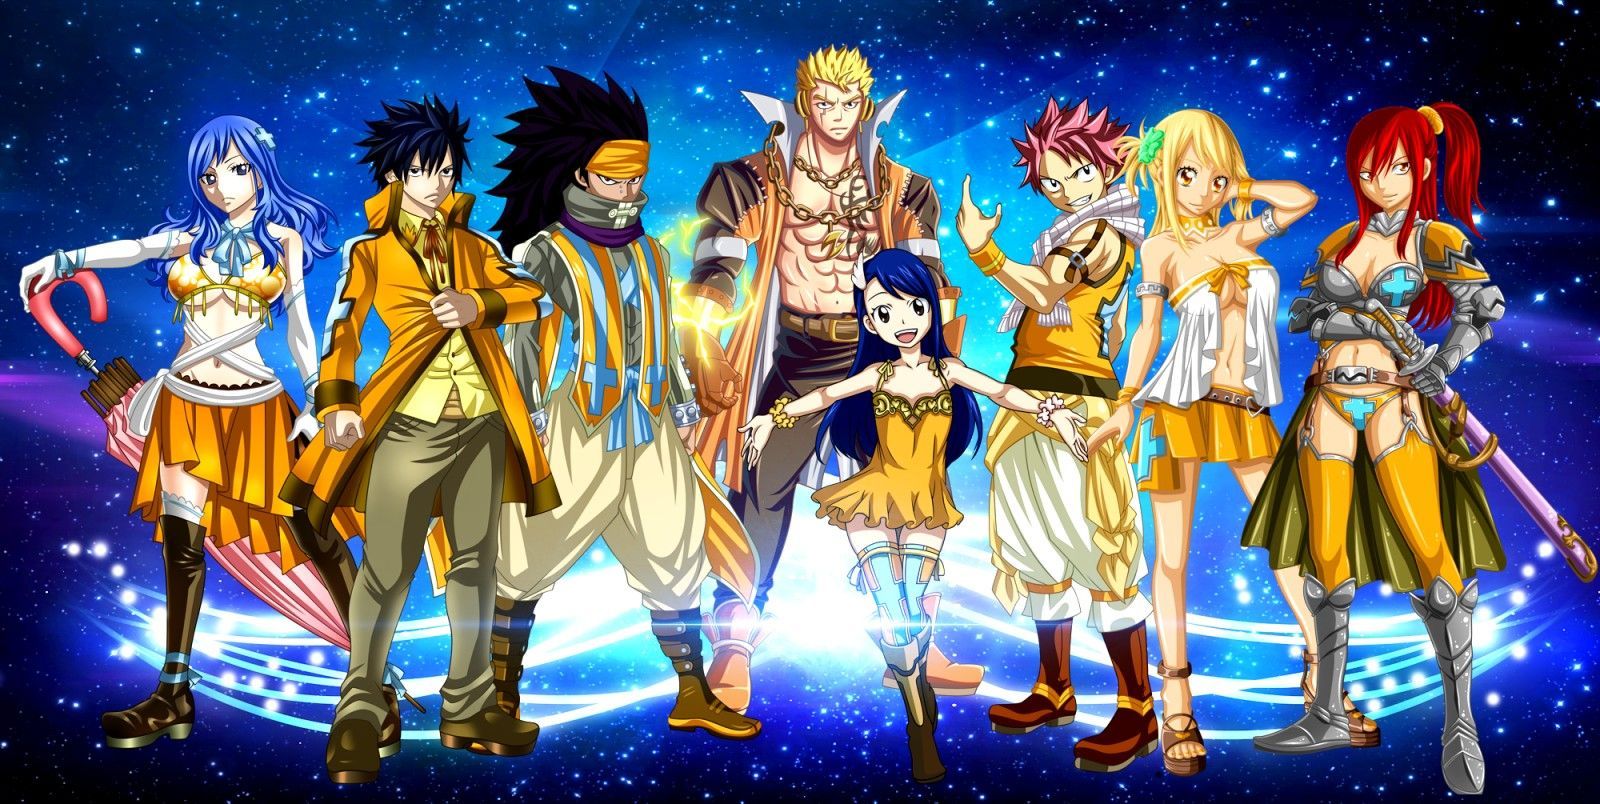 1600x804px Fantasy Fairy Tail Wallpapers | #362944